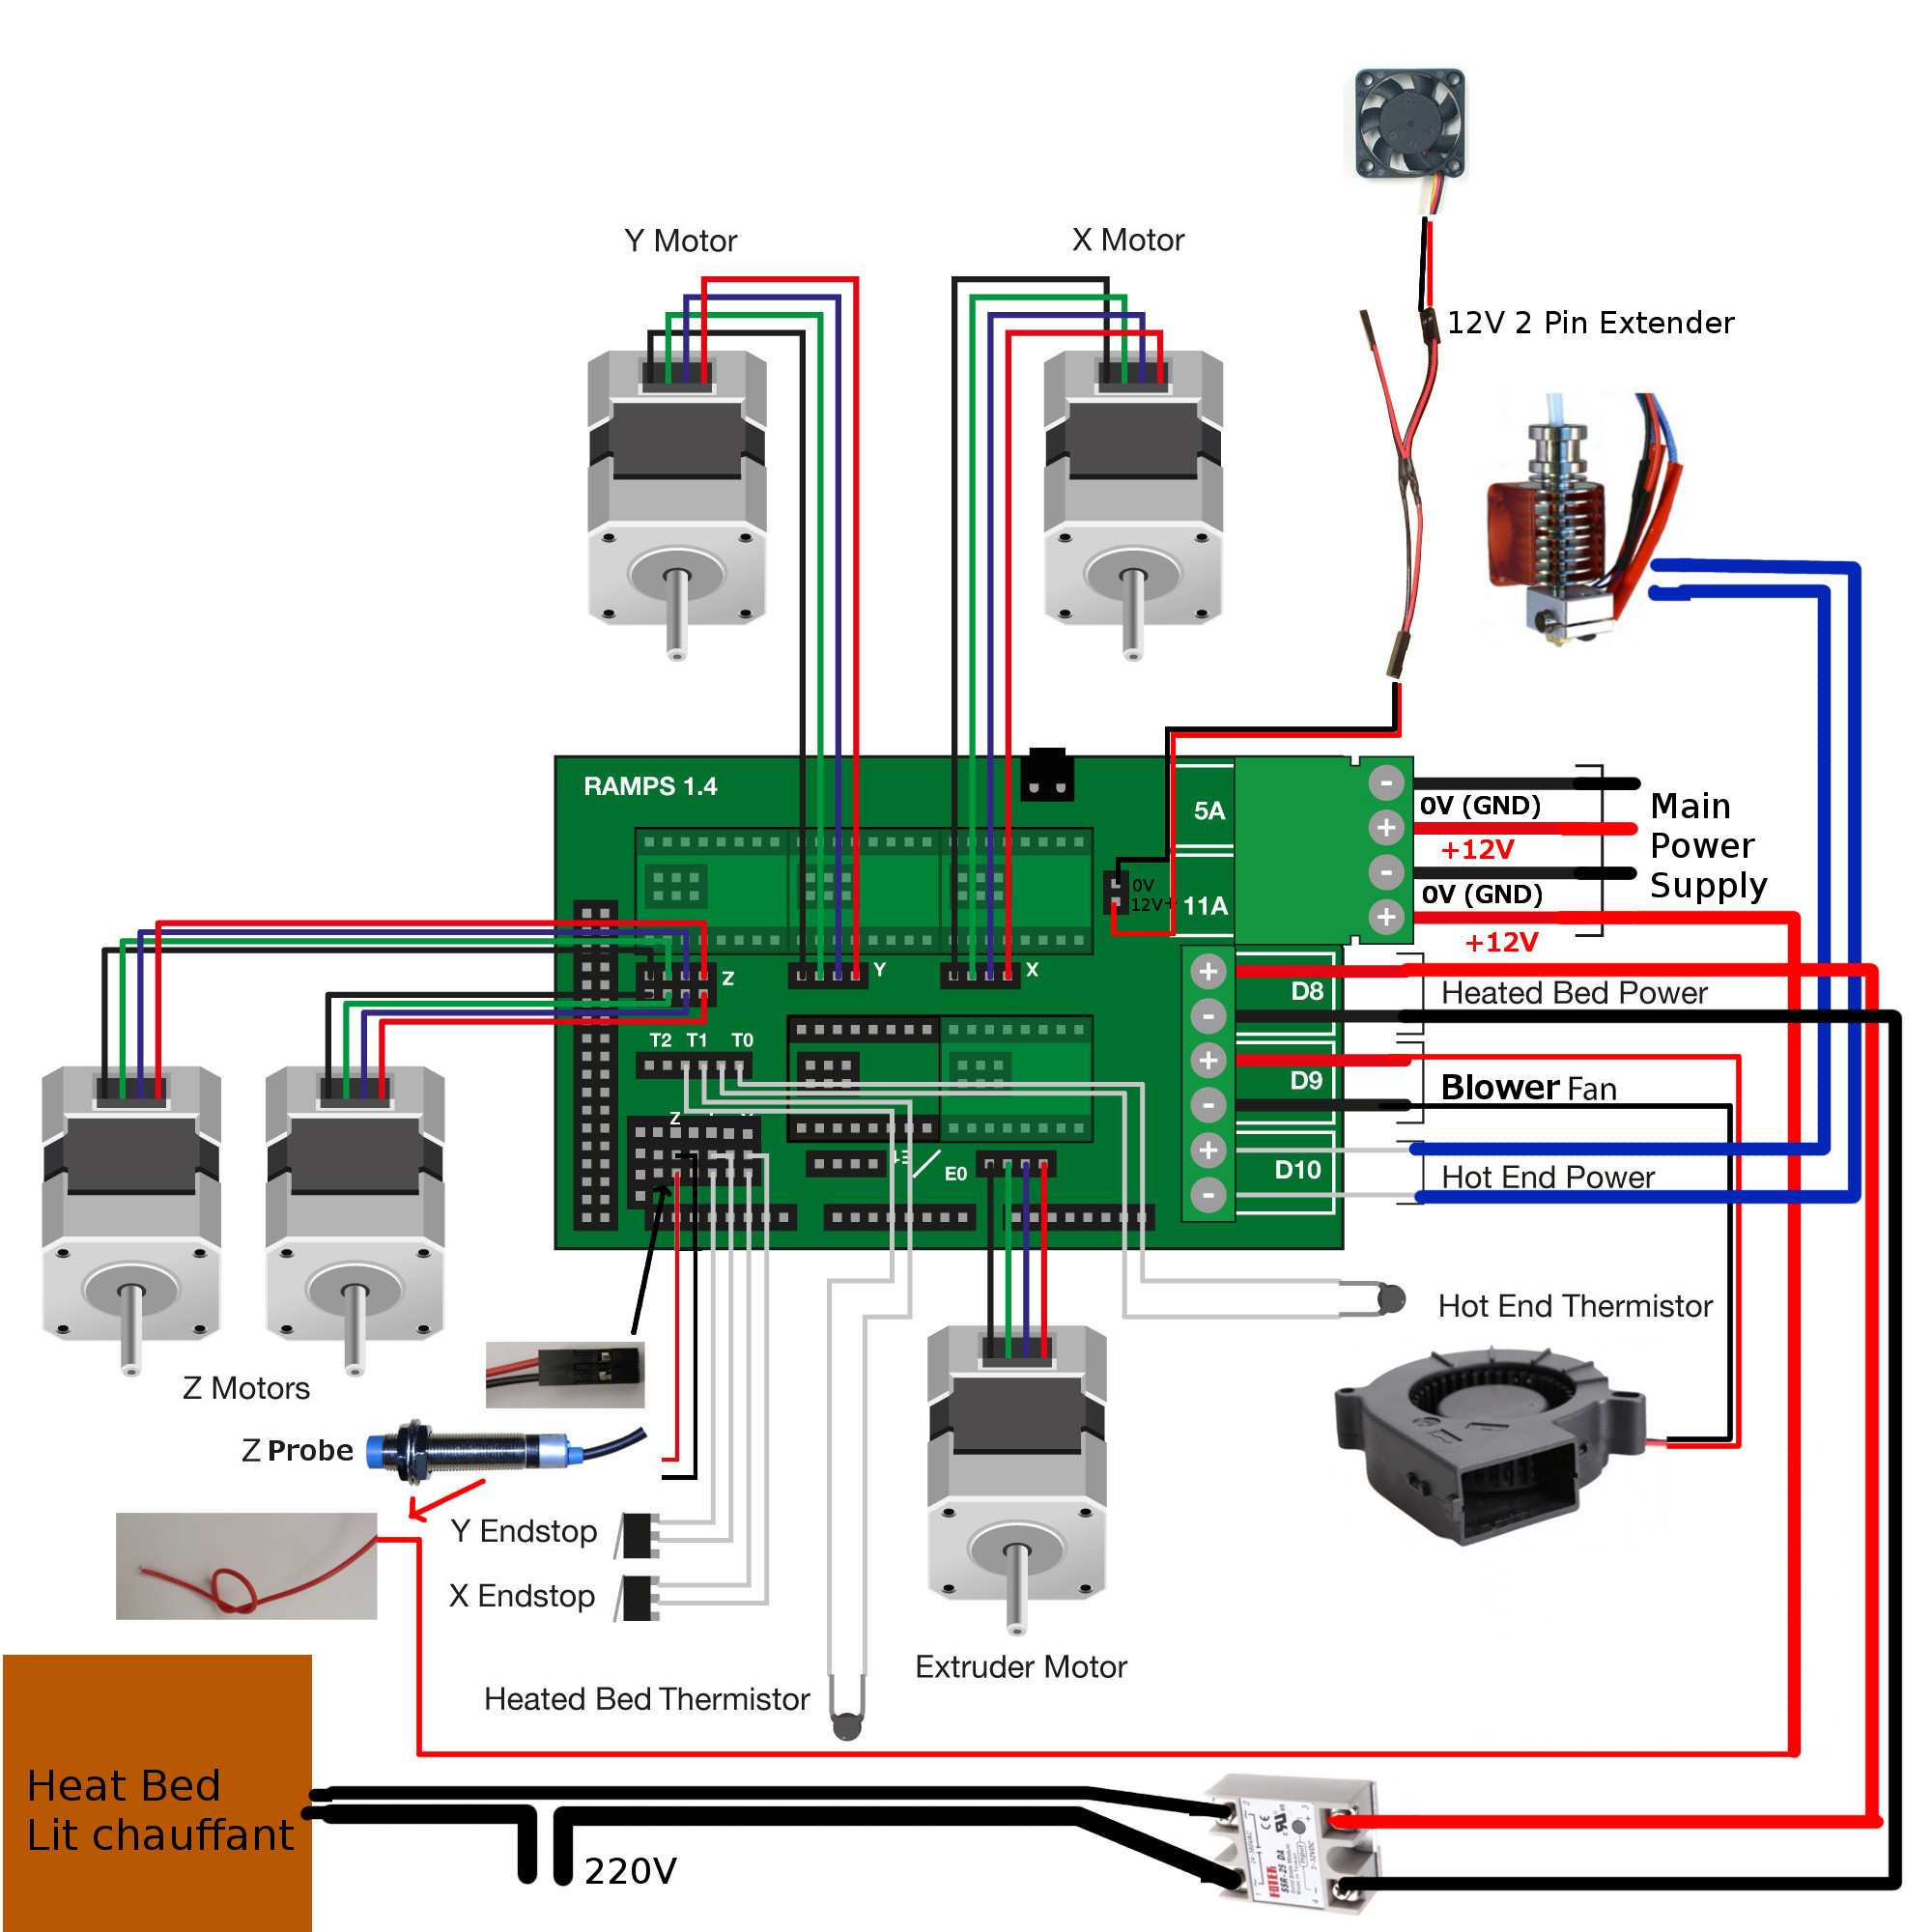 Ramps 1.4 Archives - 3D Modular Systems - Ramps 1.4 Wiring Diagram